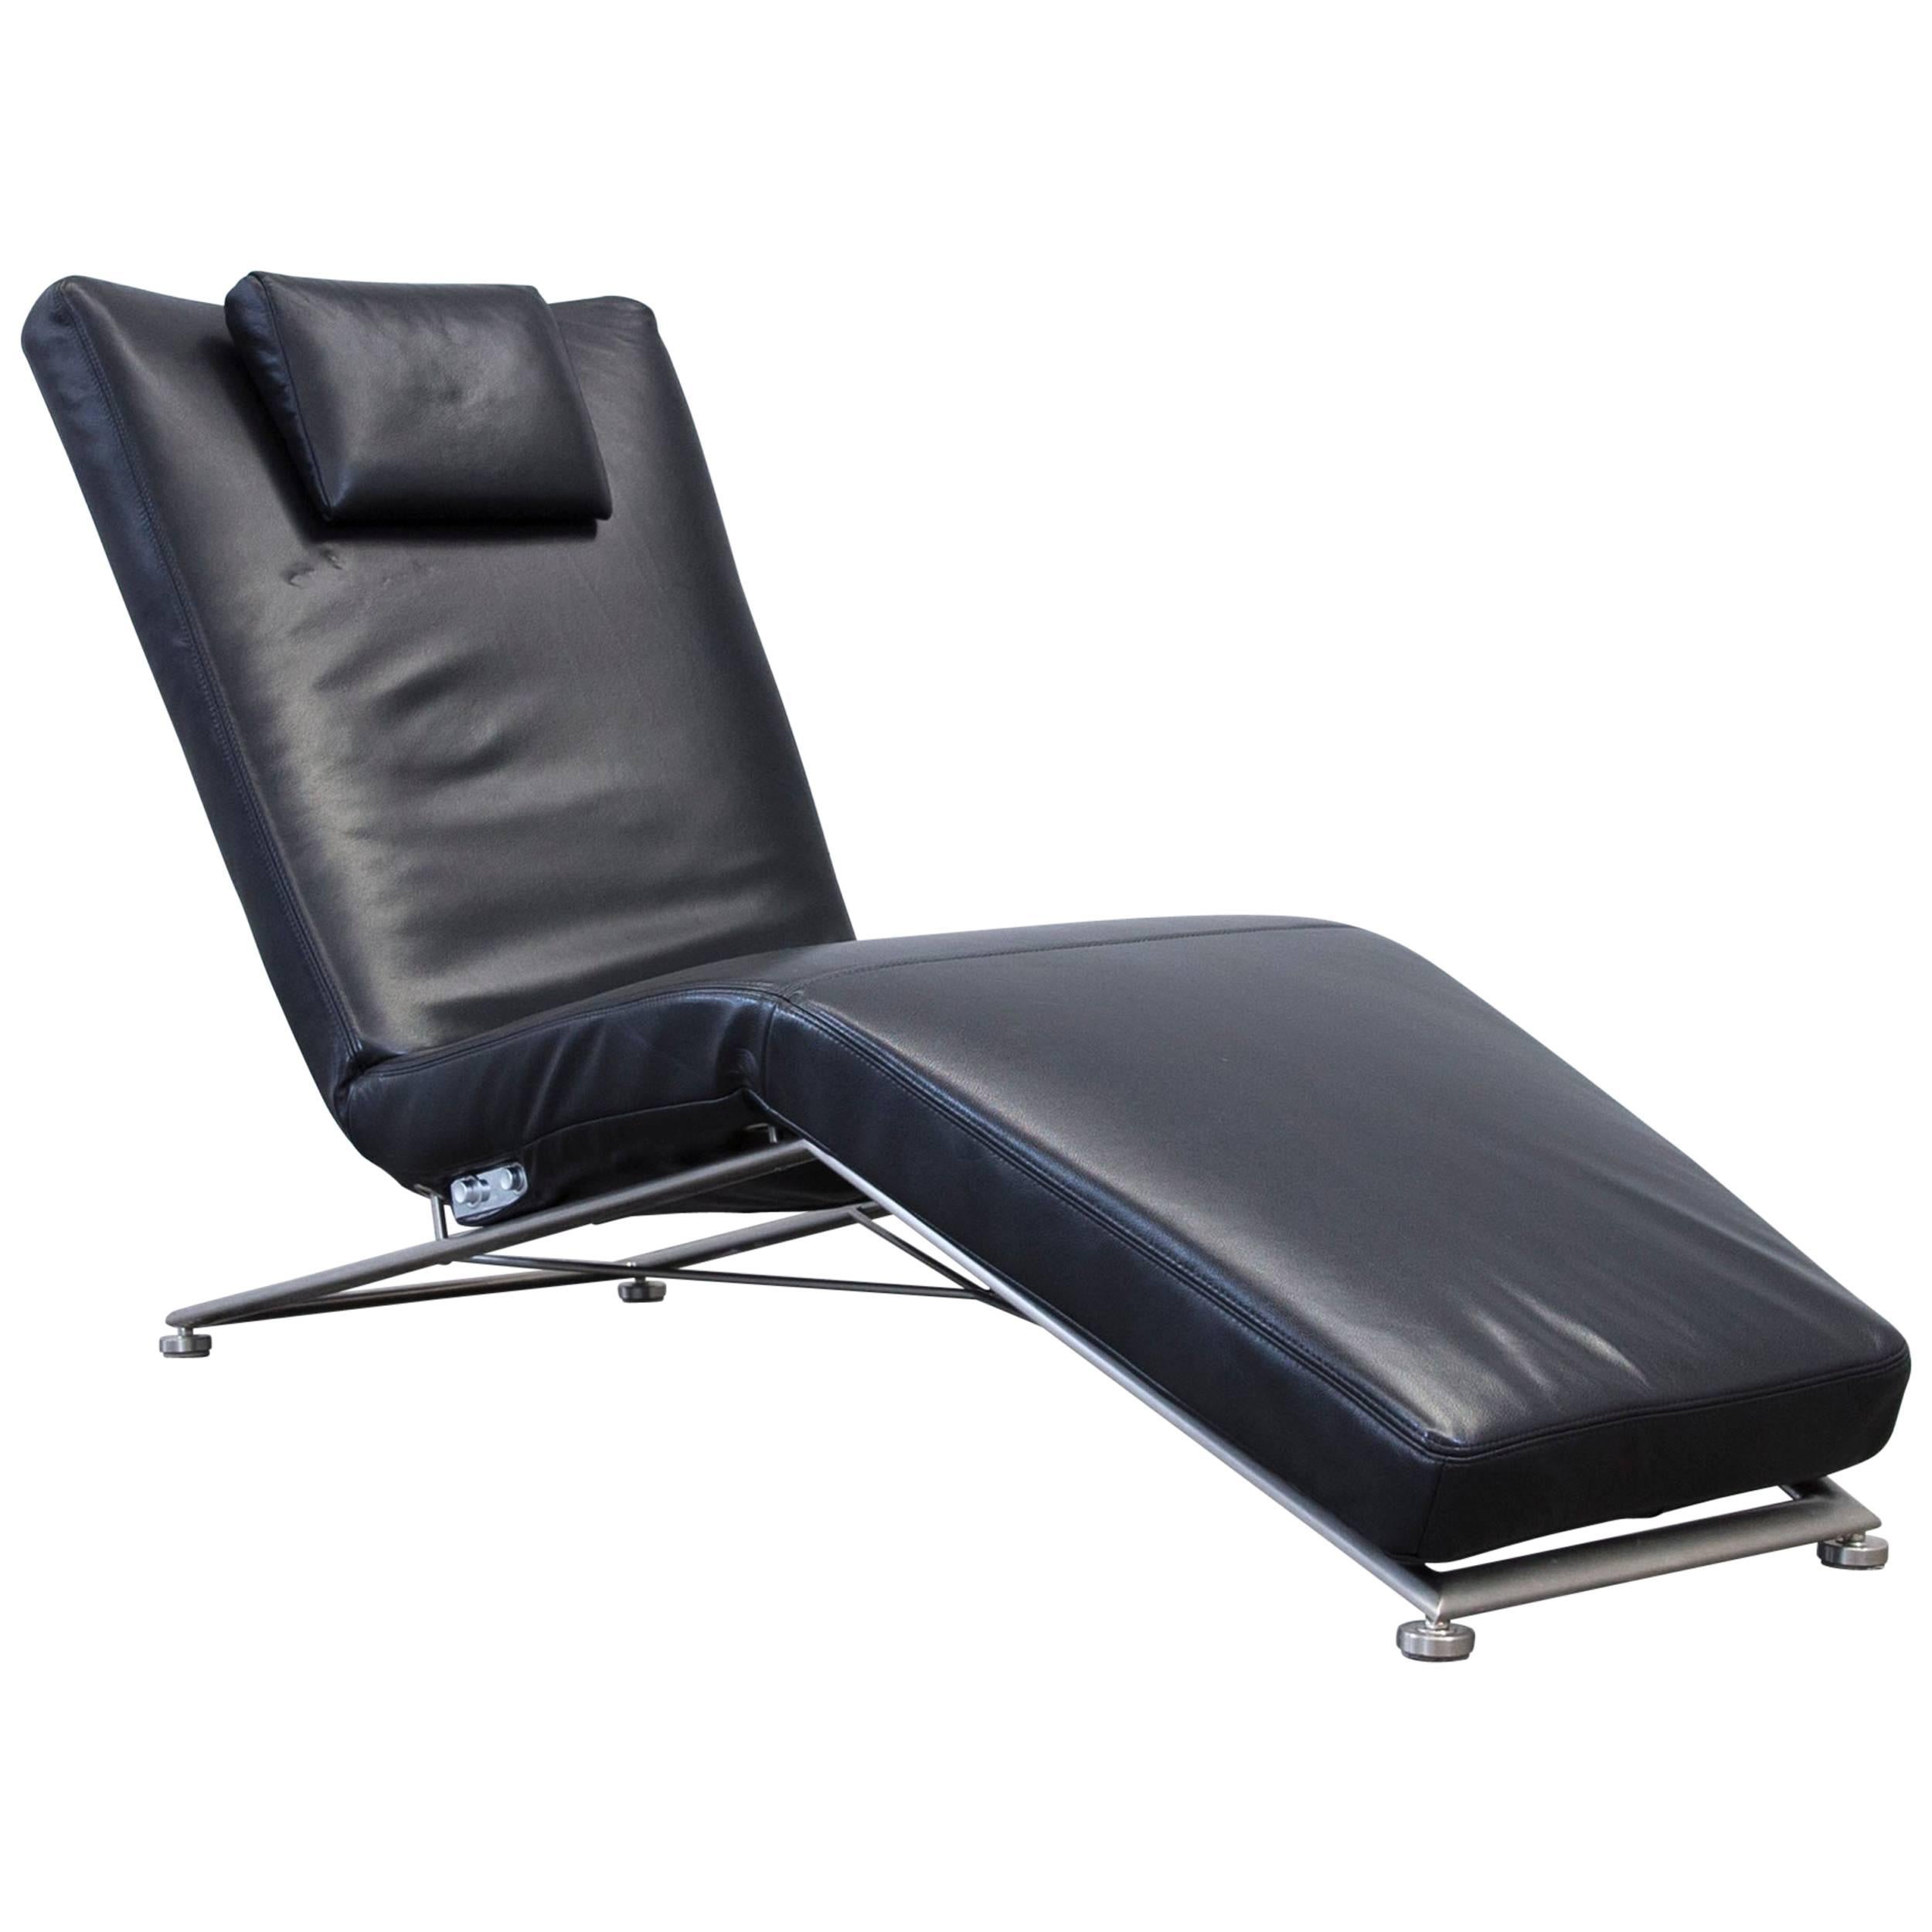 Koinor Designer Chaise Longue Leather Black Recamiere Chair Function Modern